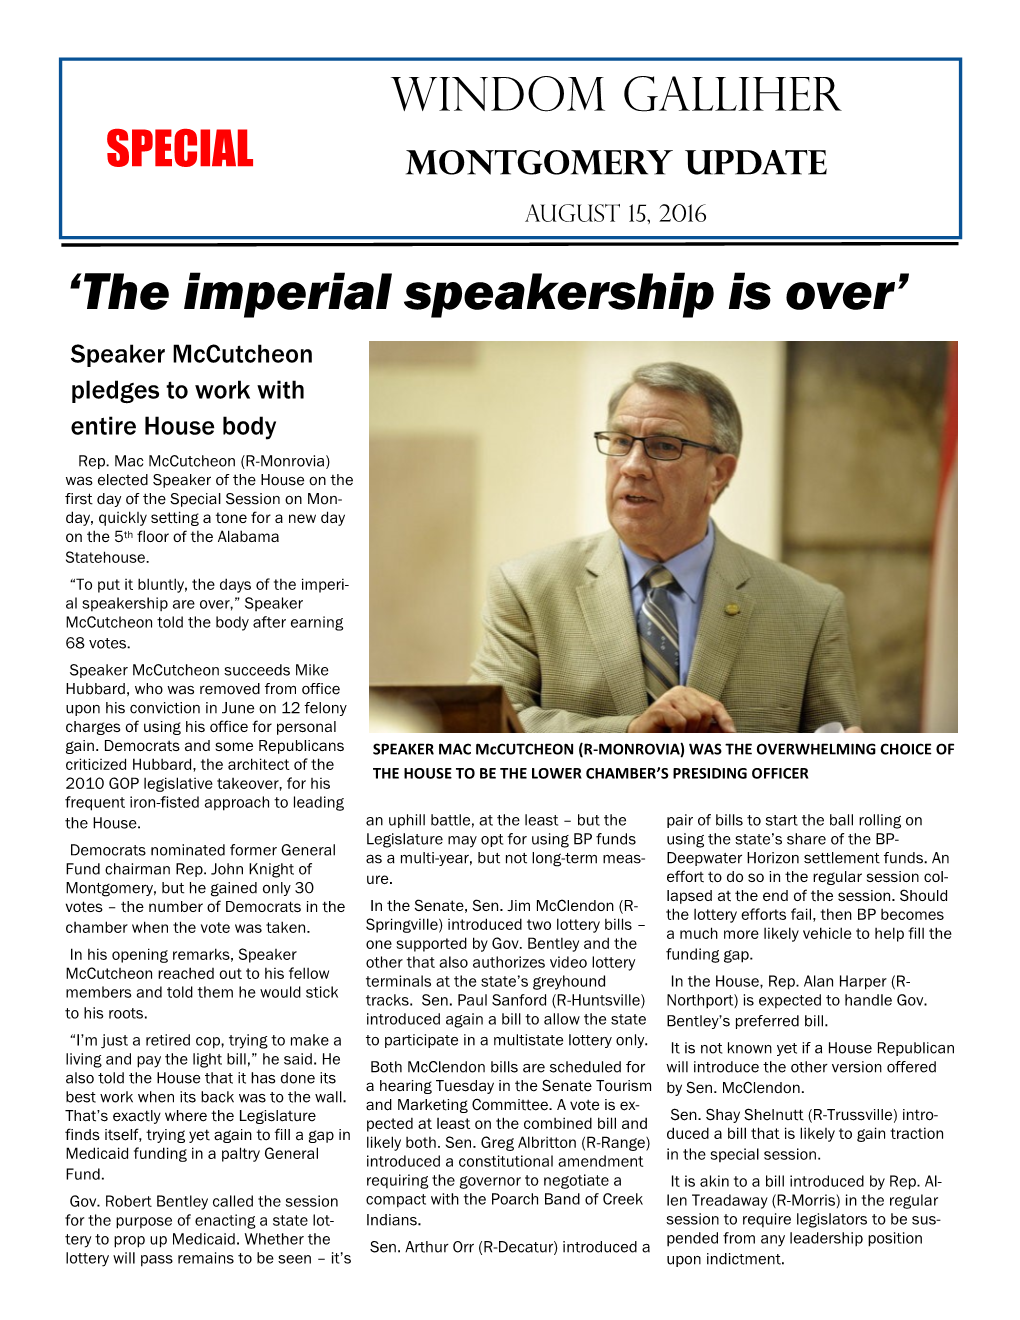 'The Imperial Speakership Is Over'